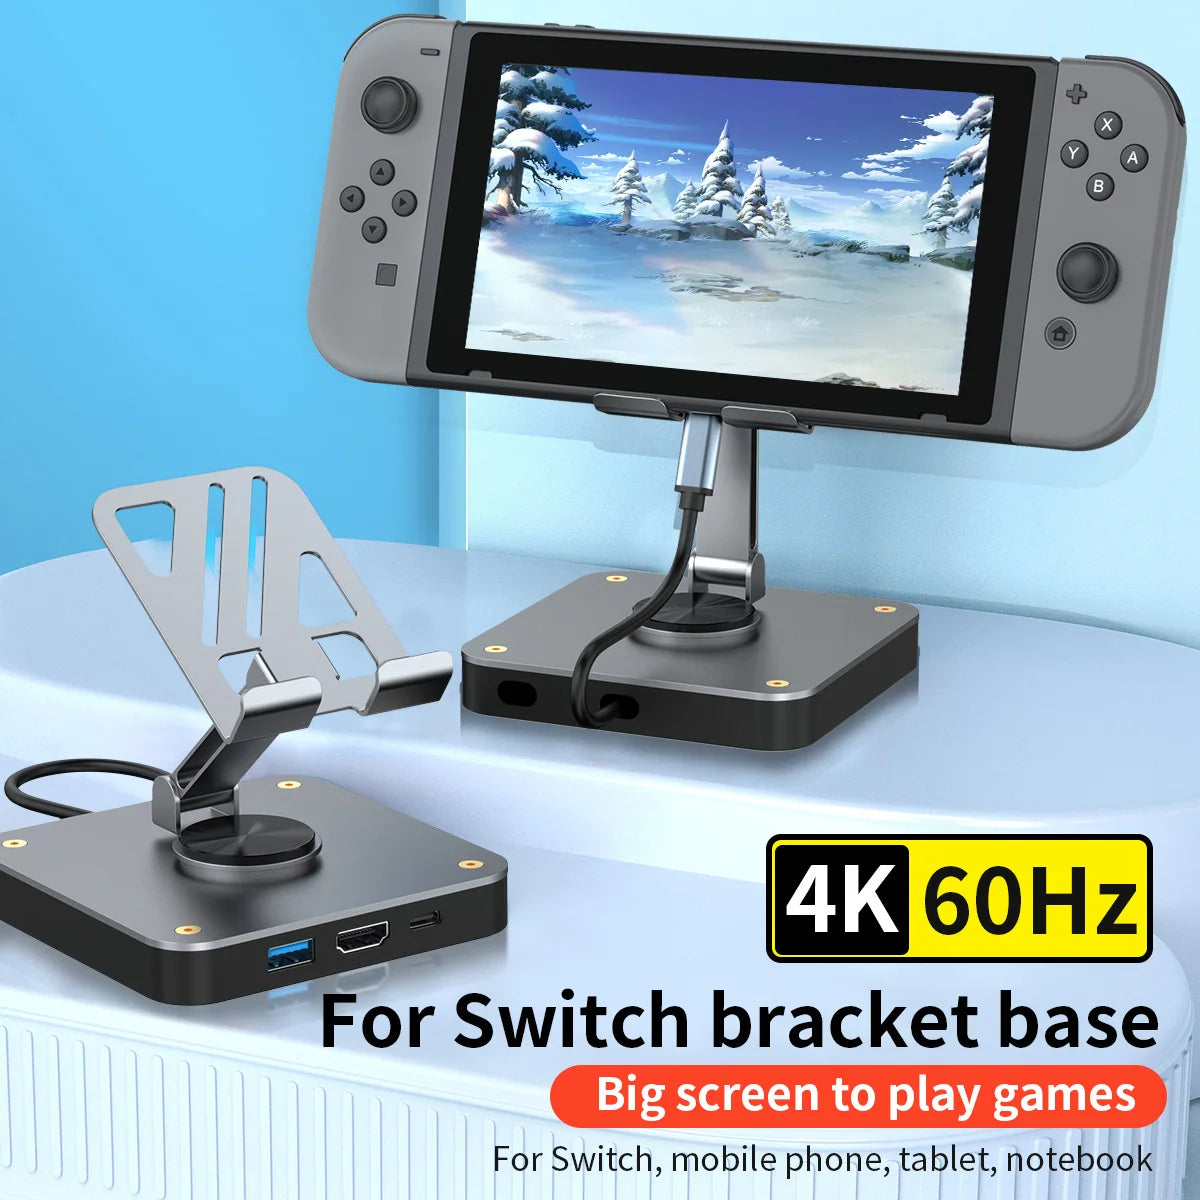 3-in-1 HDMI Hub for Phone/Tablet